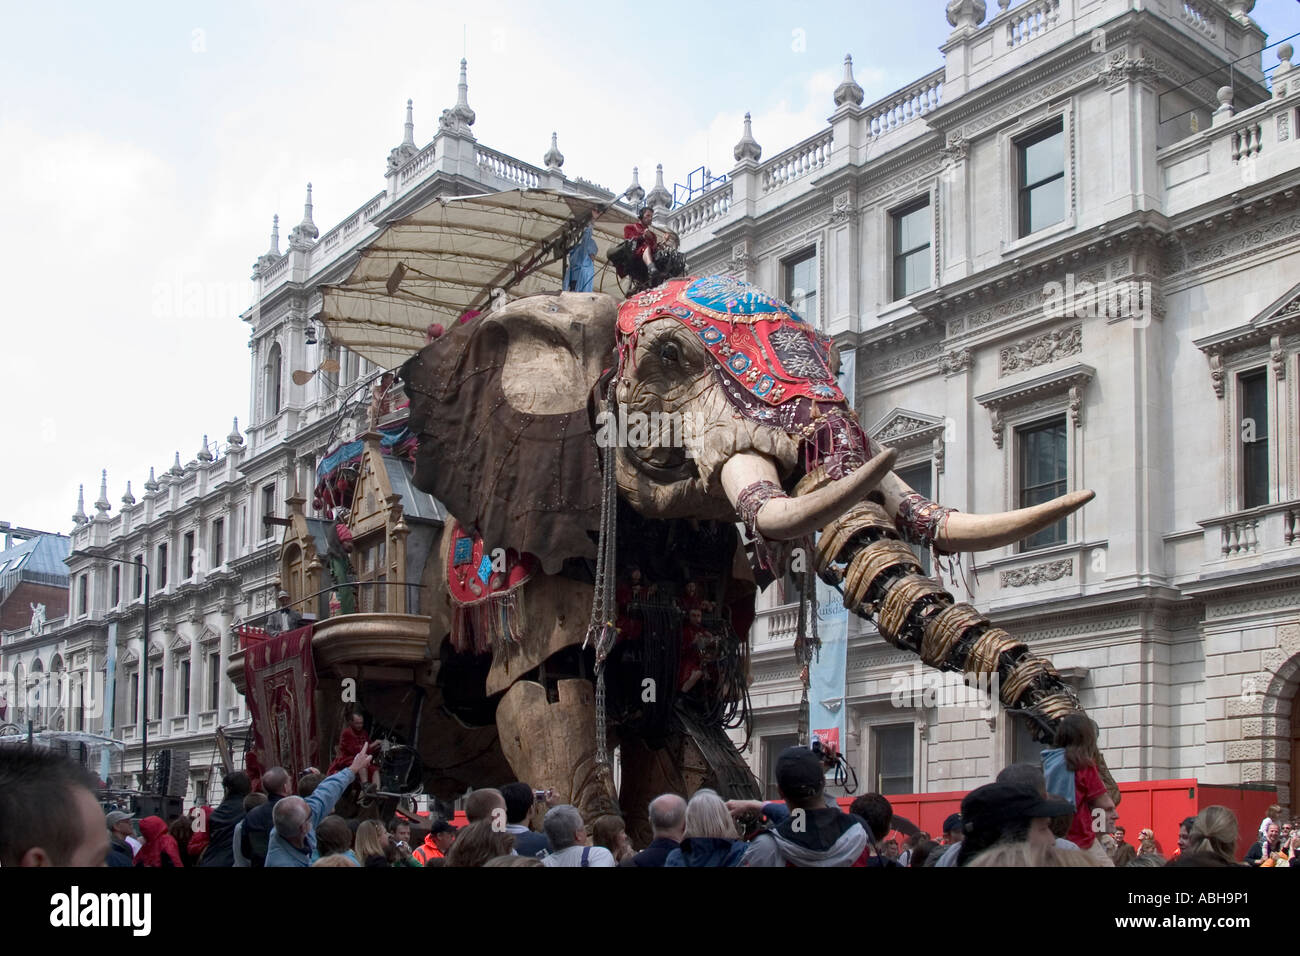 Street theatre by Royal De Luxe. The Sultan's Elephant walks down Piccadilly. London, England Stock Photo